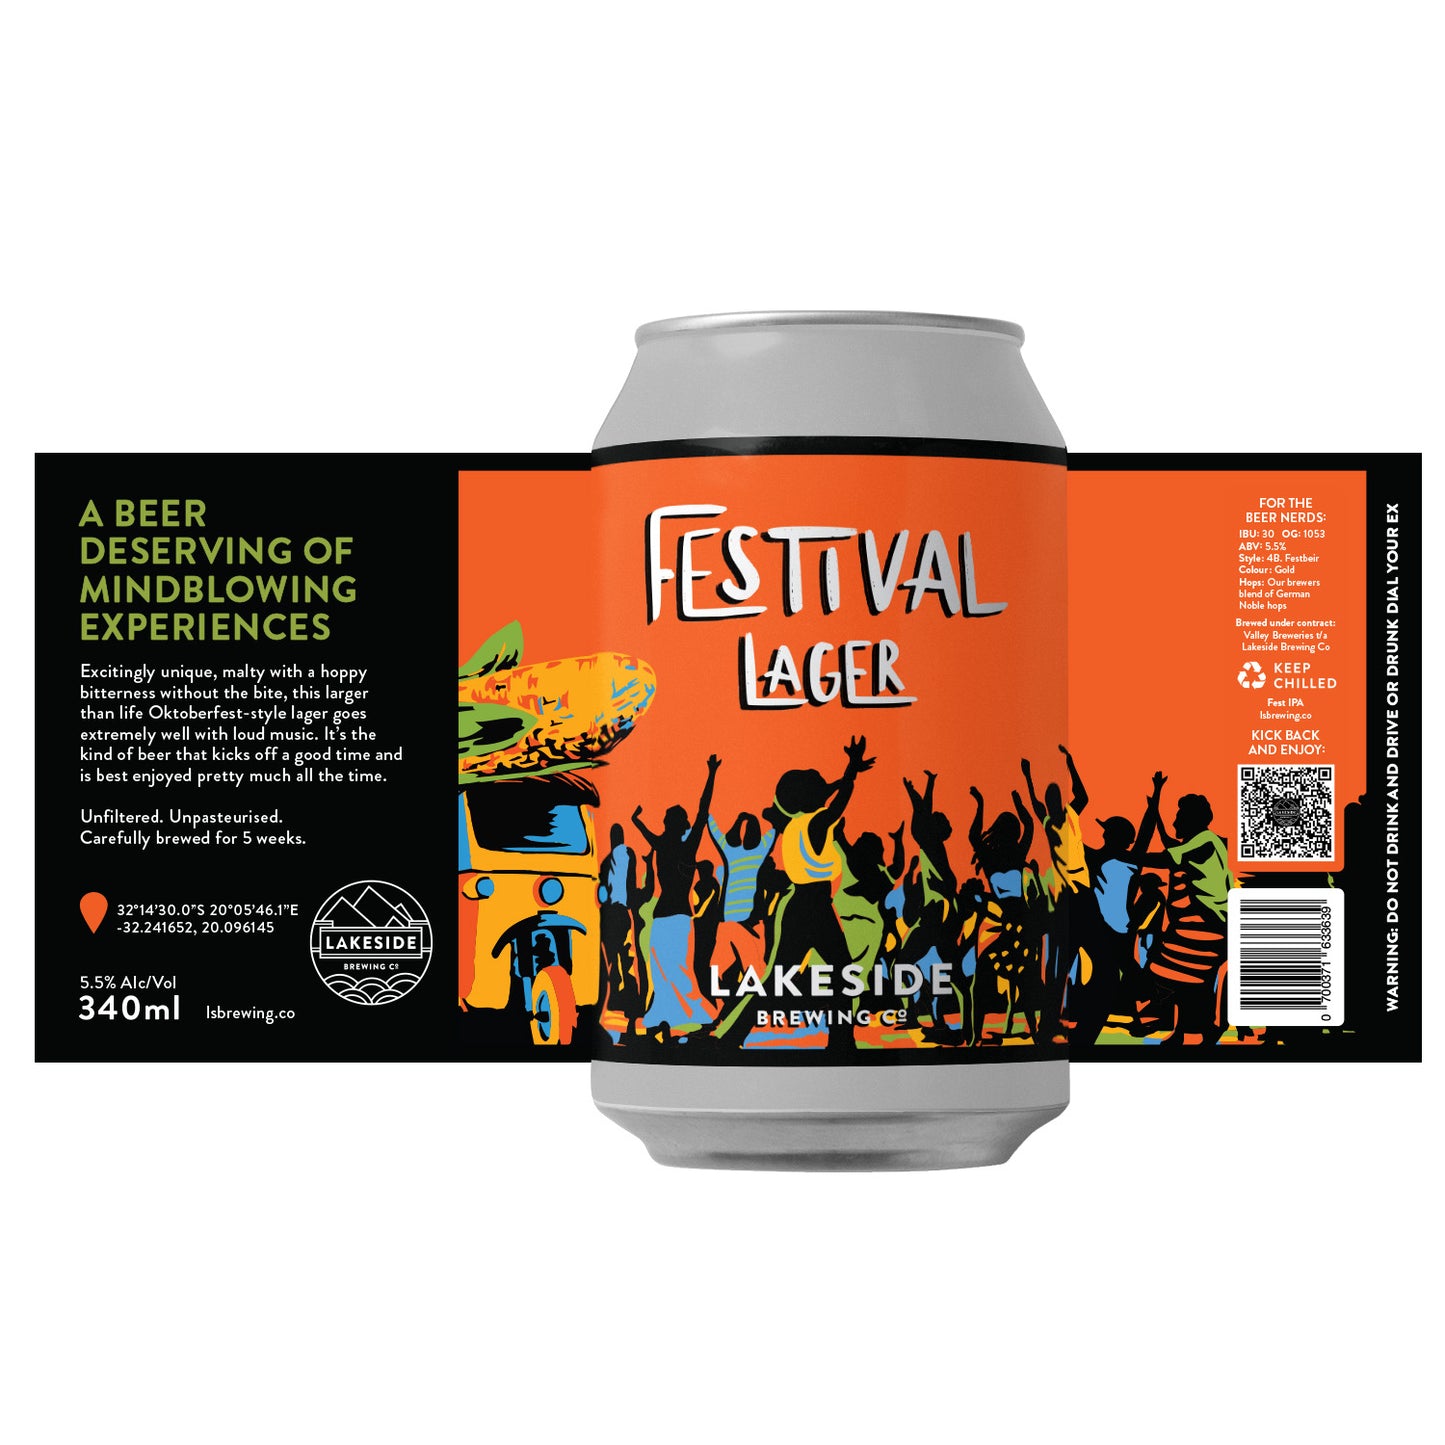 FESTIVAL LAGER (12 Cans)